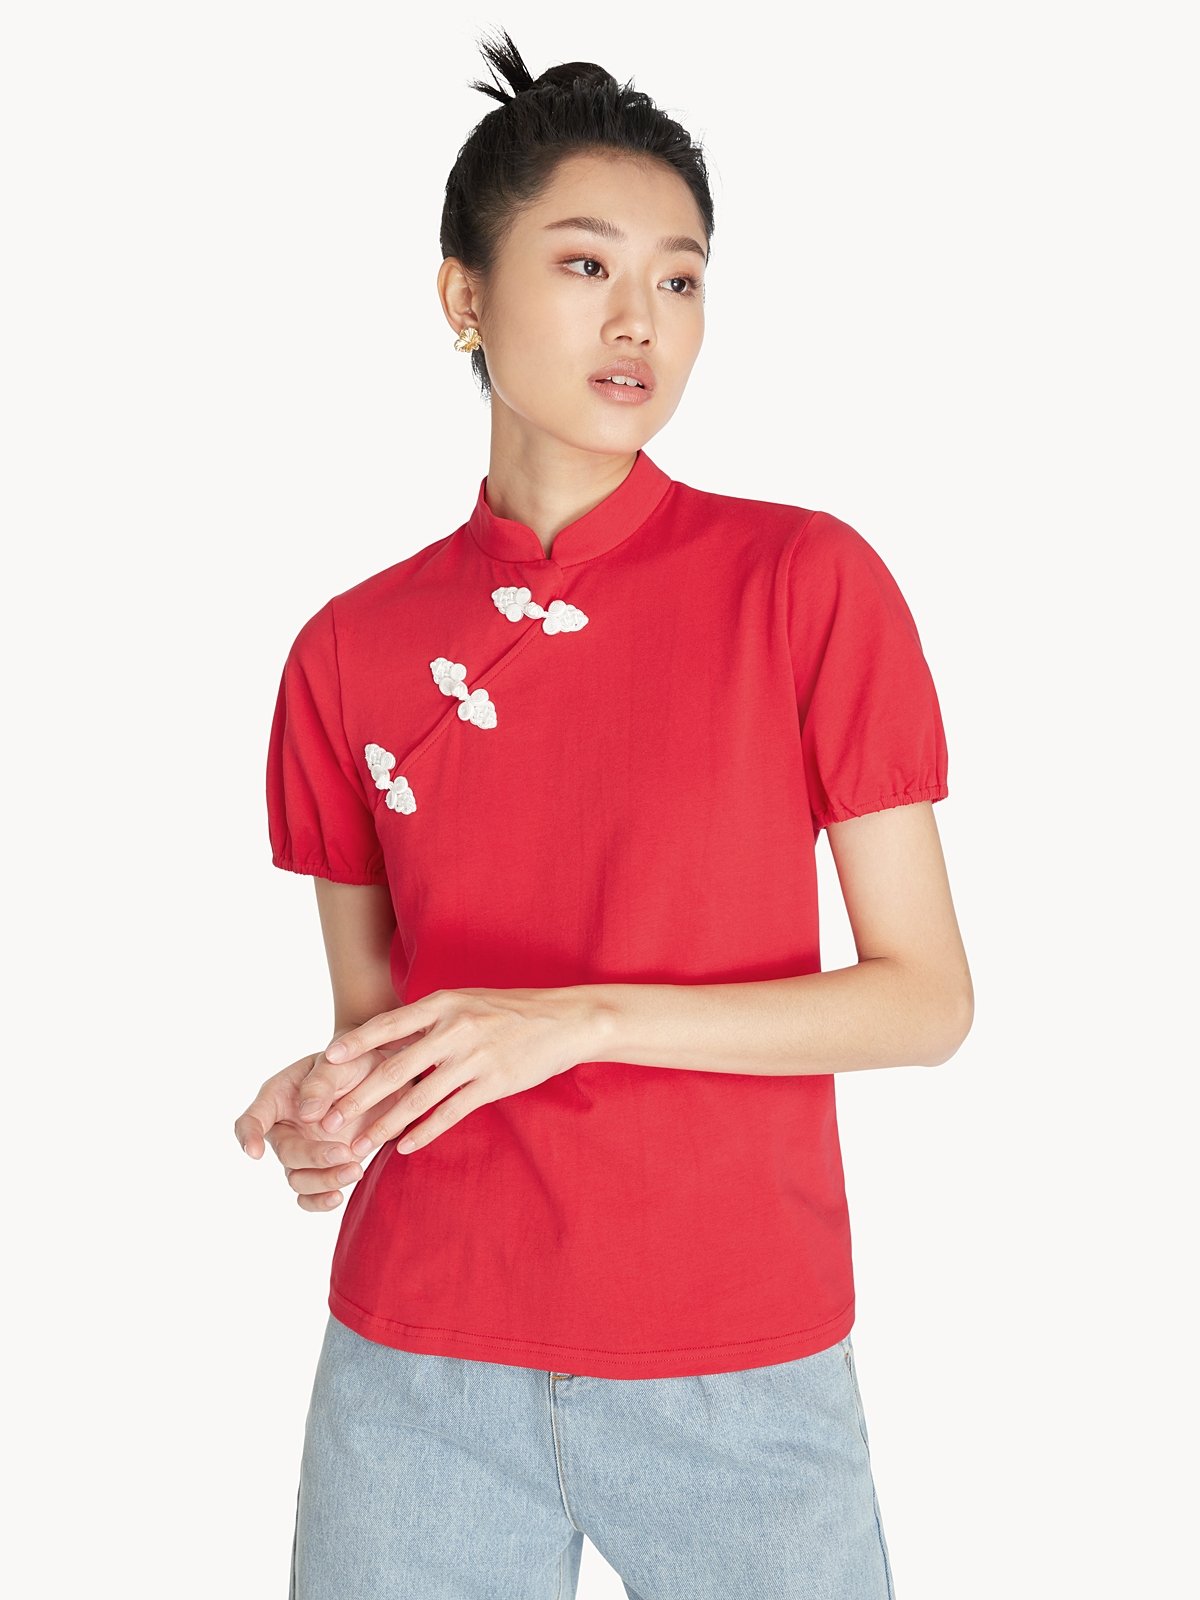 Mandarin Collar Cut Out Top - Red - Pomelo Fashion